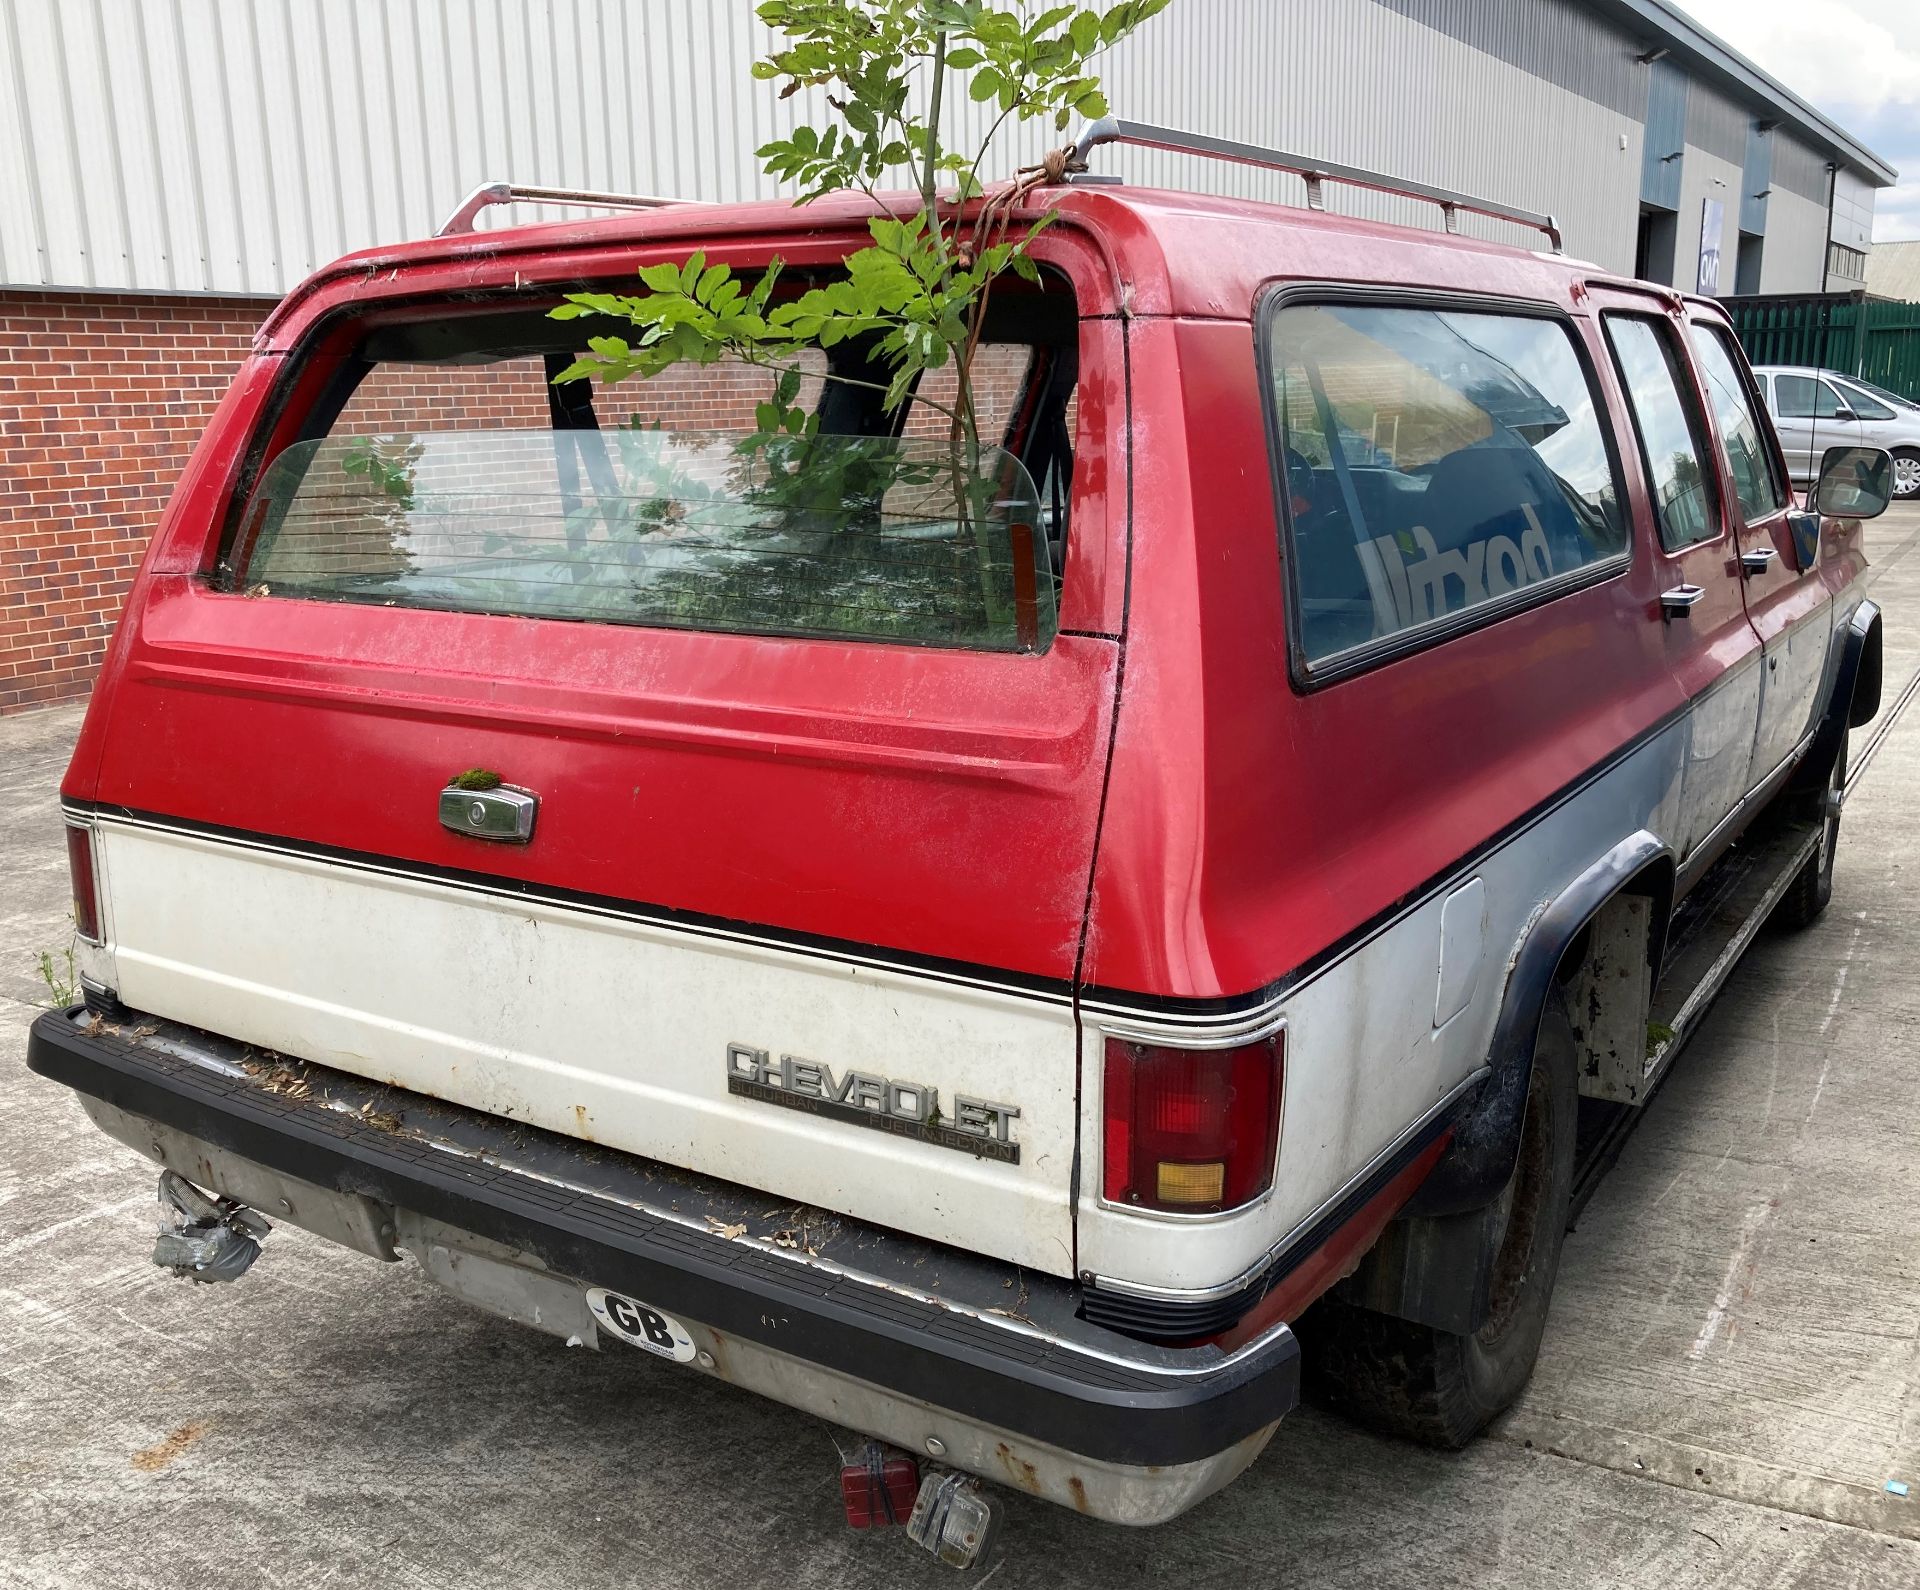 ON INSTRUCTIONS FOLLOWING THE SALE OF A PROPERTY This vehicle is sold as a renovation - Image 17 of 23